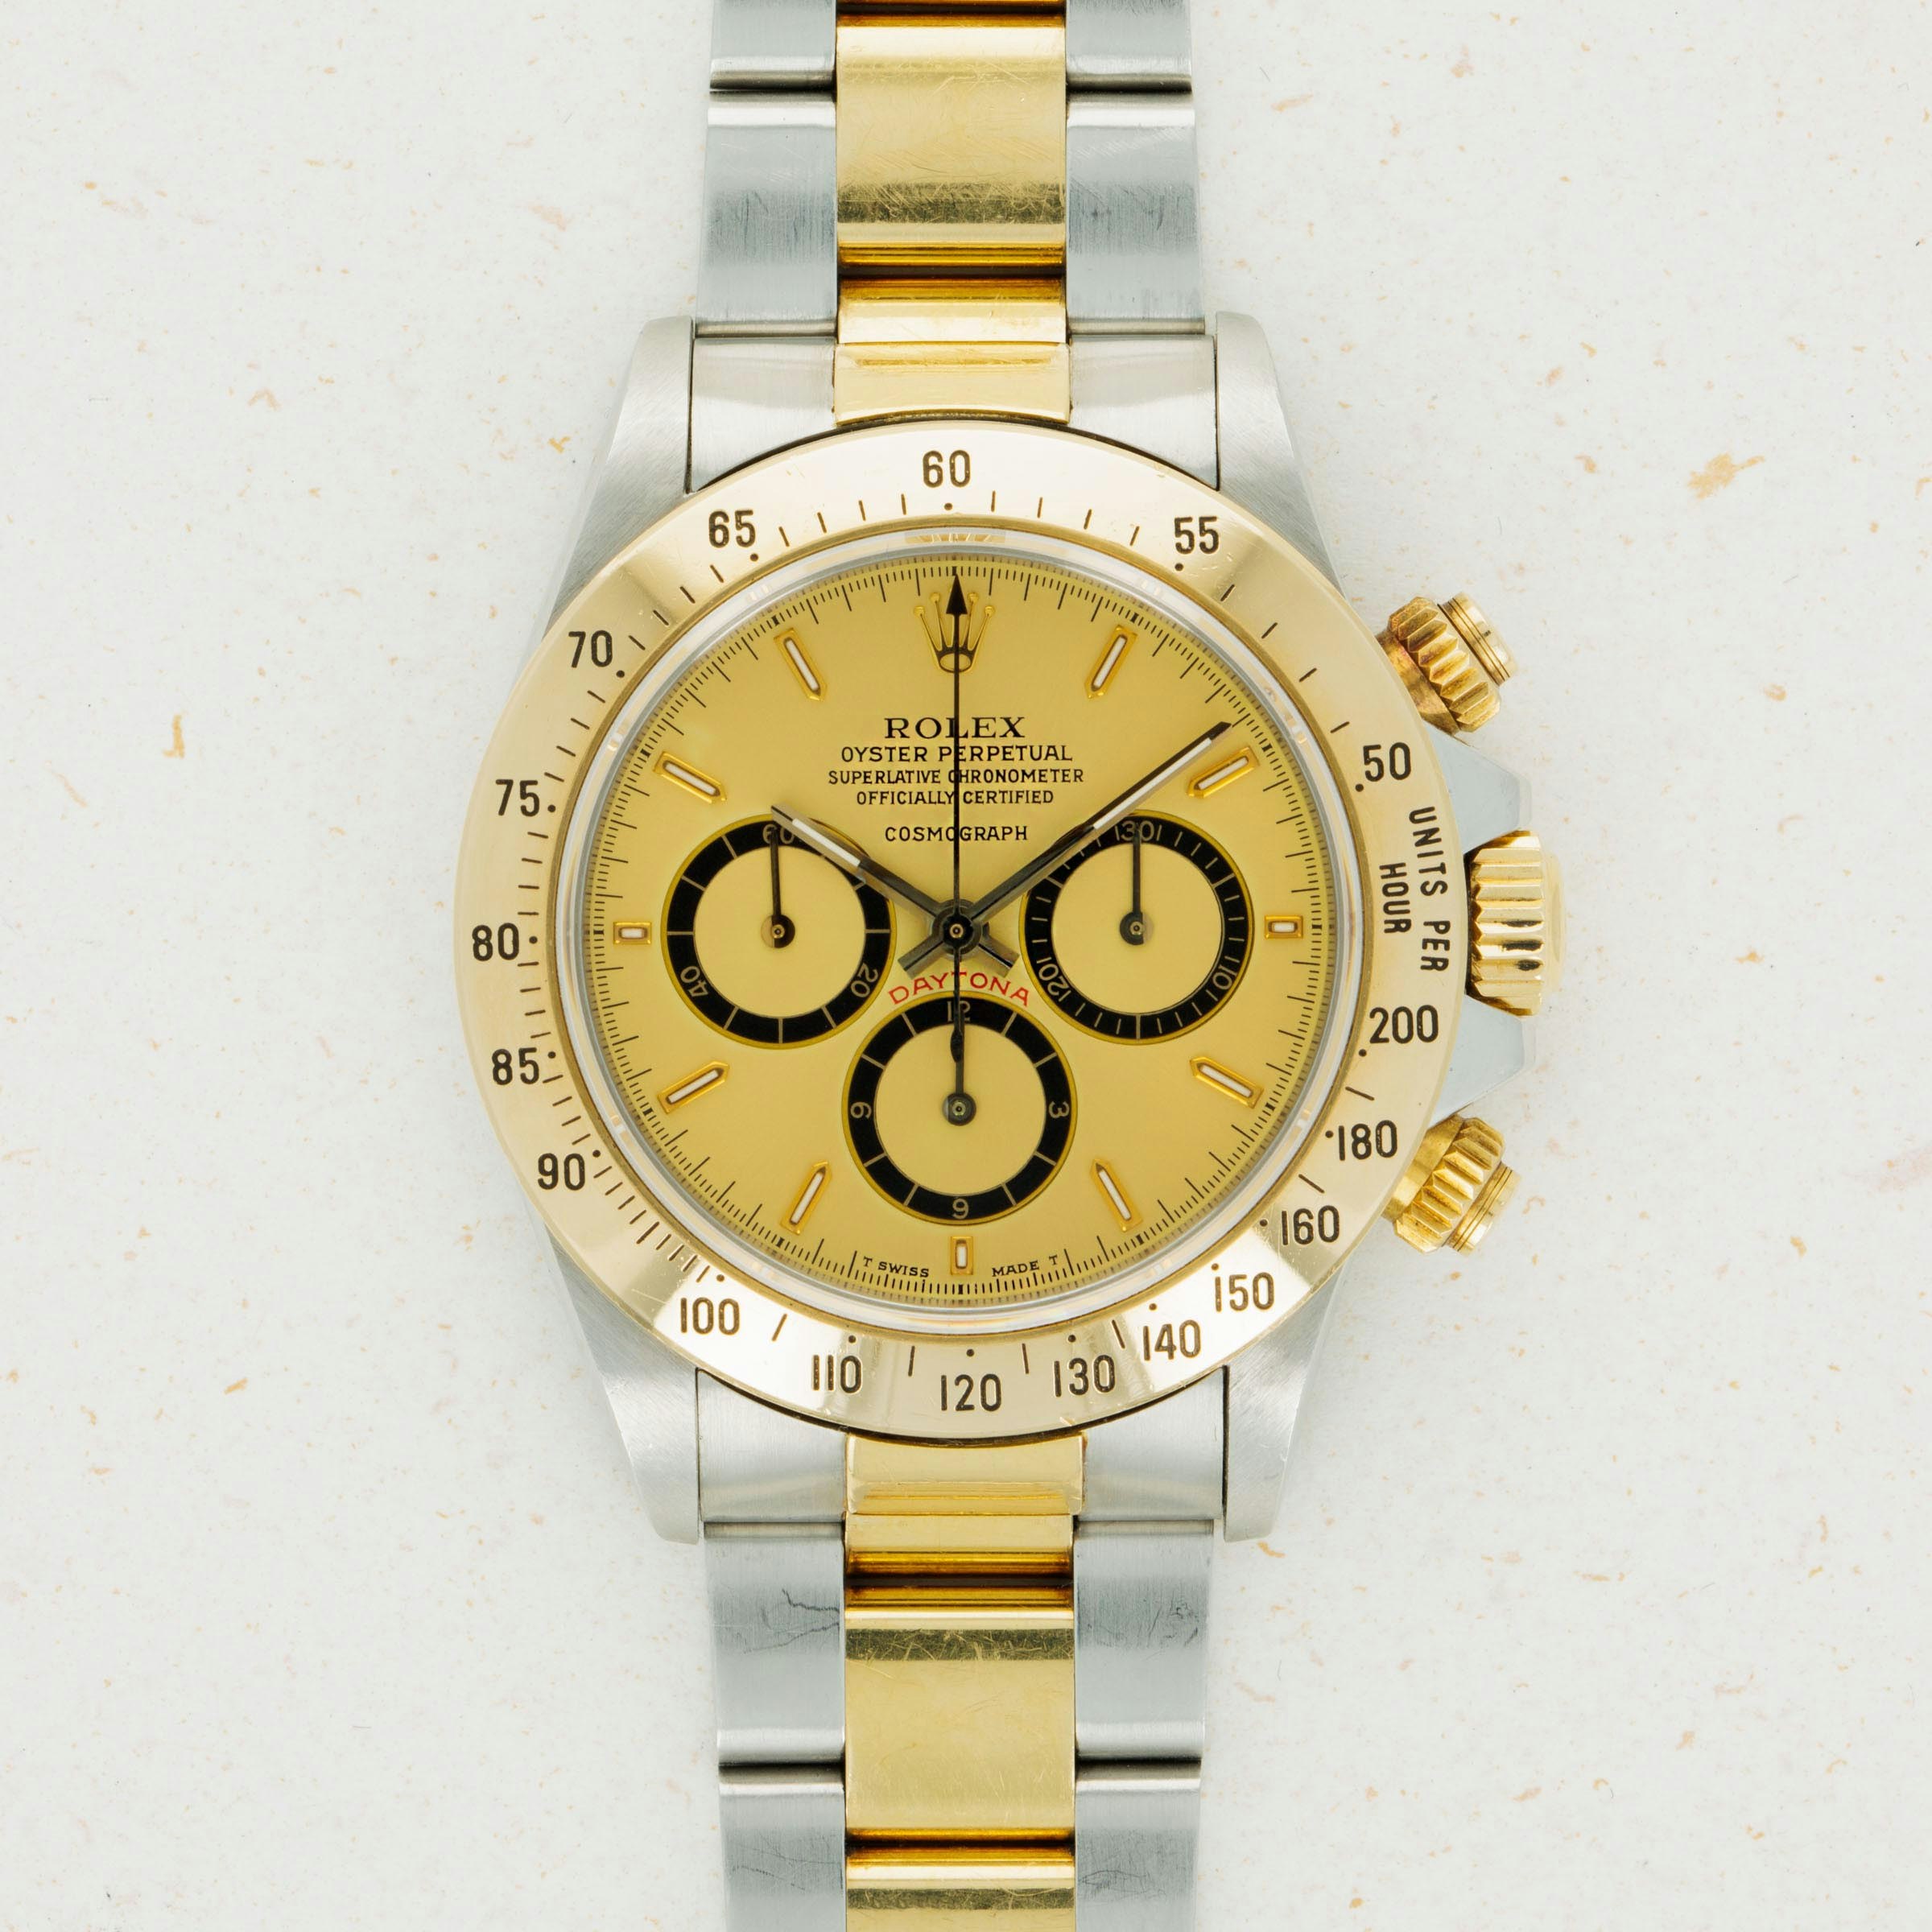 Thumbnail for Rolex Daytona Floating Cosmograph 16523 Two-Tone Champagne Dial